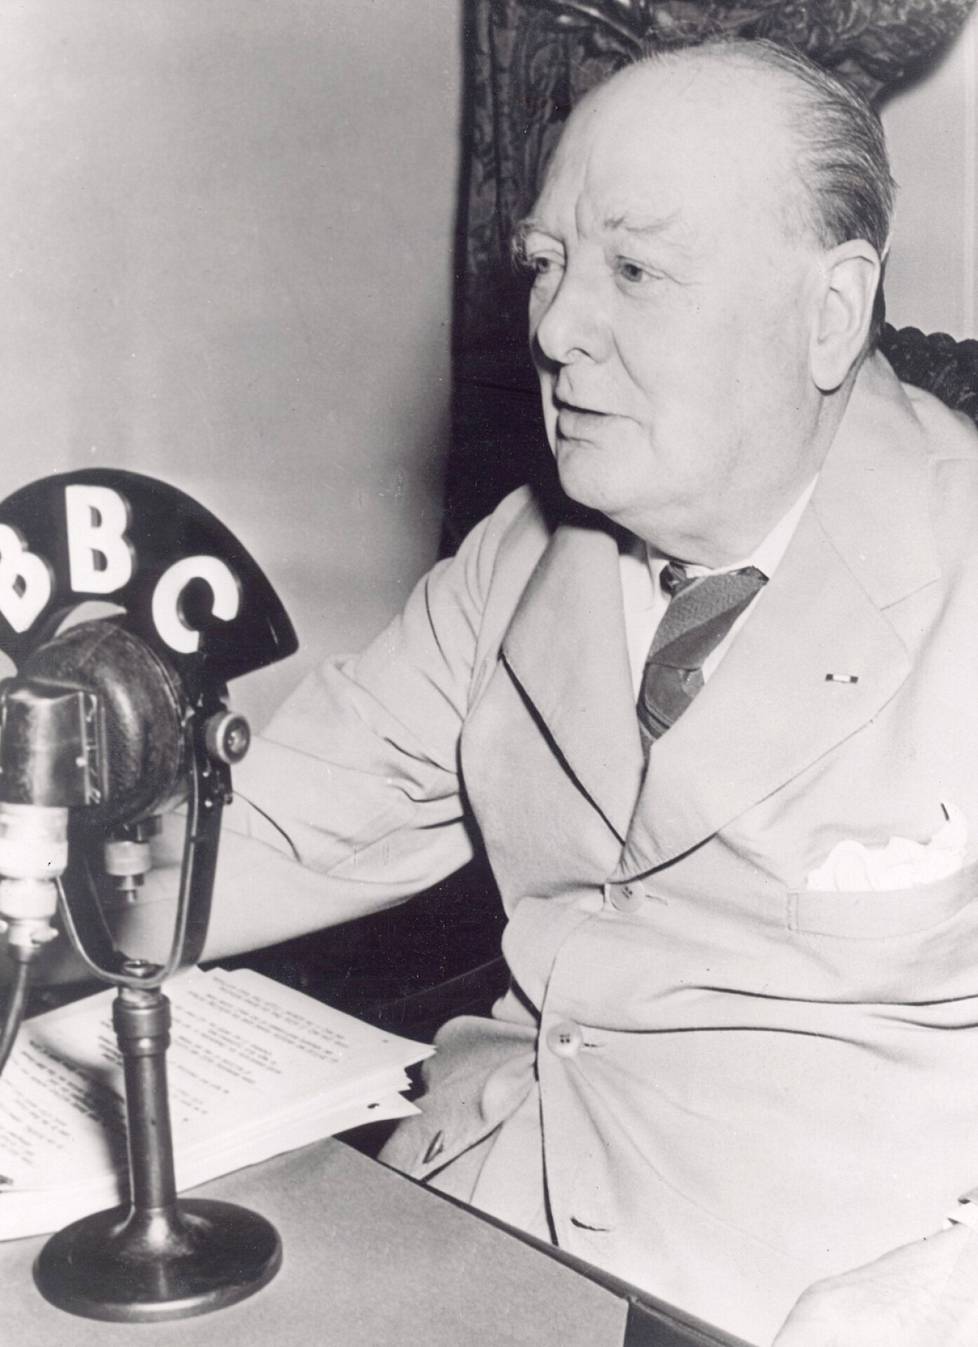 Former Prime Minister Winston Churchill speaks on BBC radio.  Churchill's tenure in the country ended in 1955. The BBC's television monopoly ended the same year.